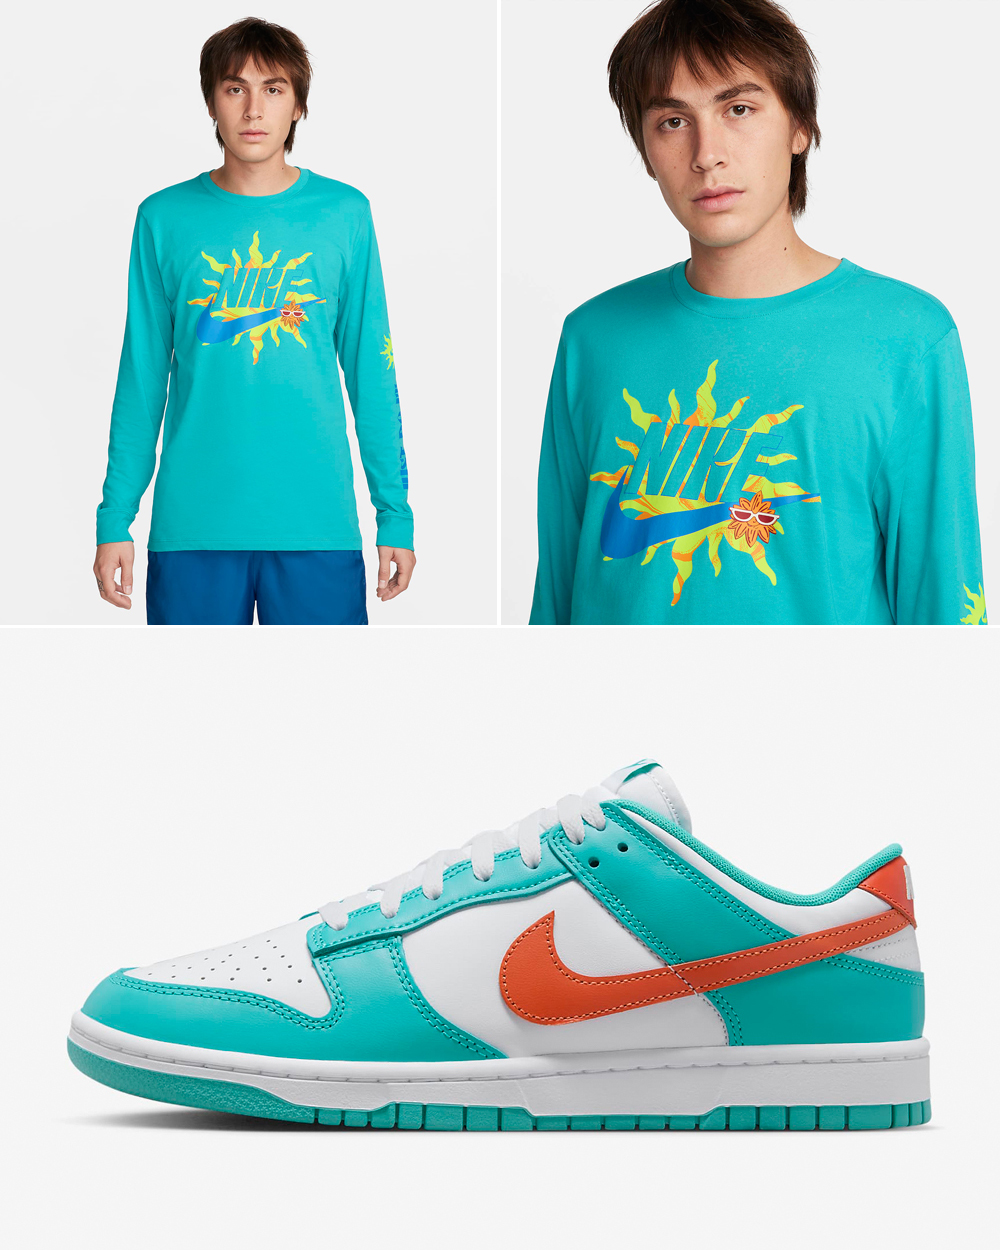 Nike-Dunk-Low-Miami-Dolphins-Shirt-Matching-Outfit